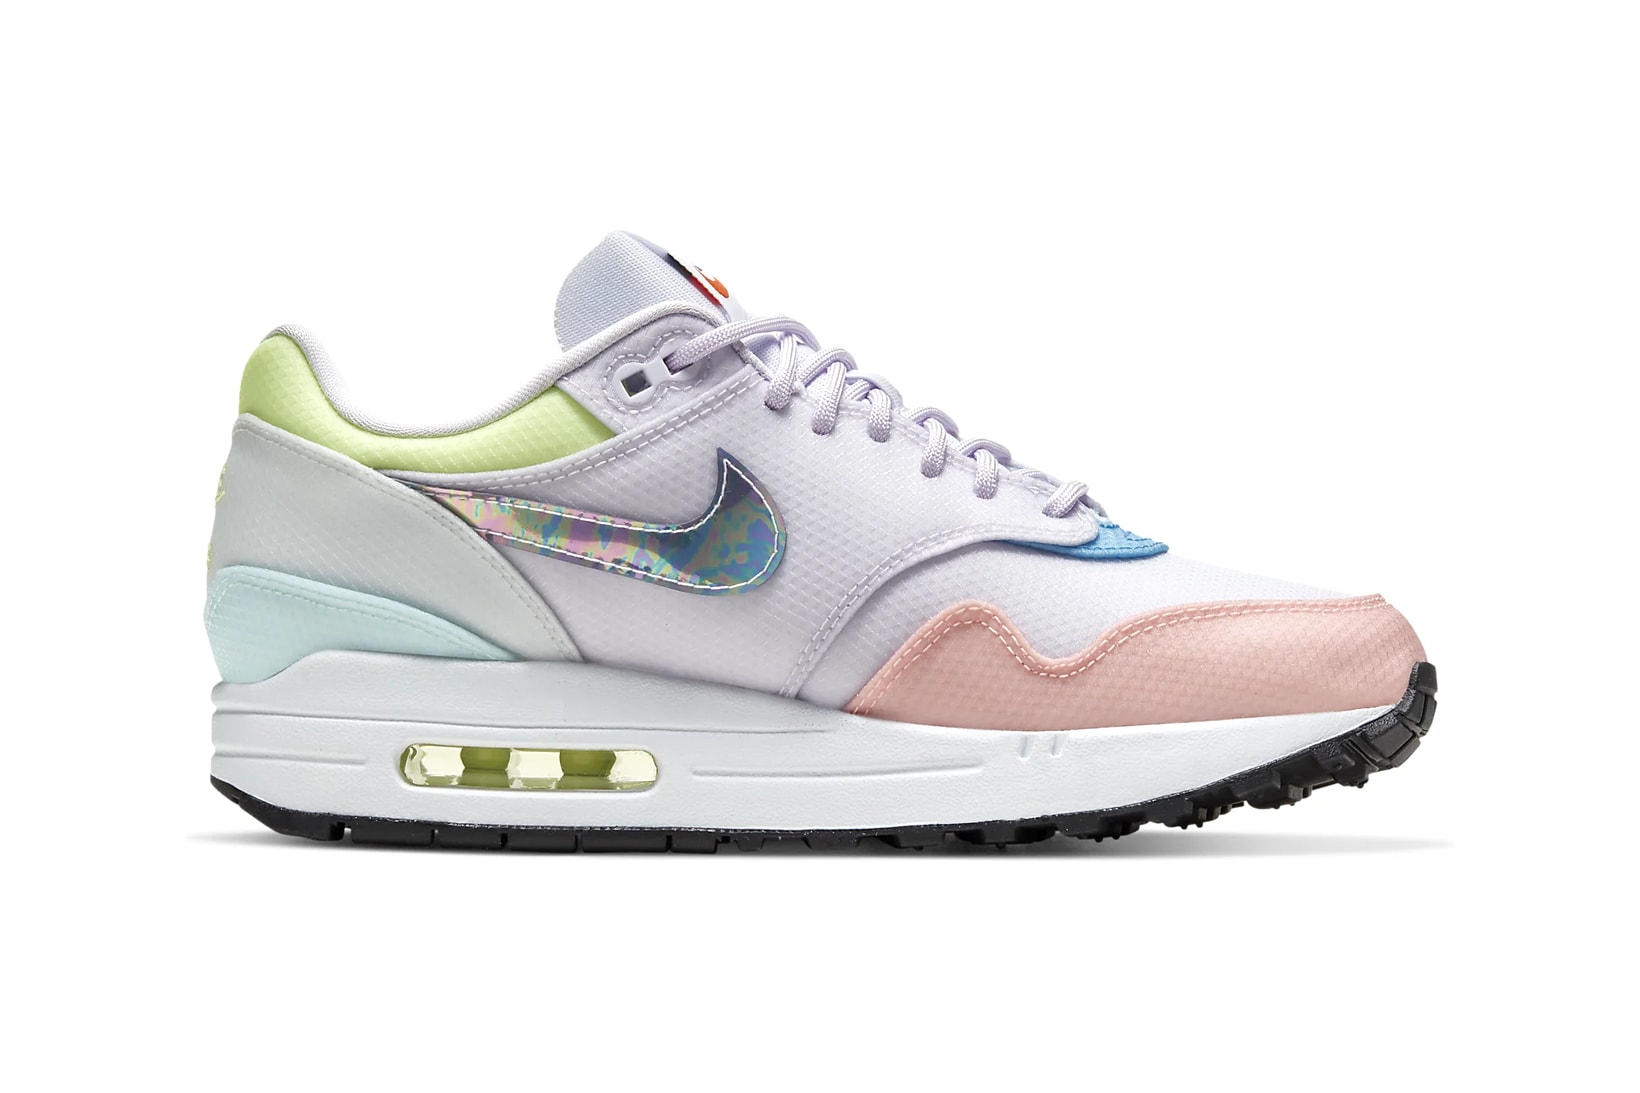 nike air max 1 barely grape hyper turquoise rose clear iridescent swoosh womens sneakers 